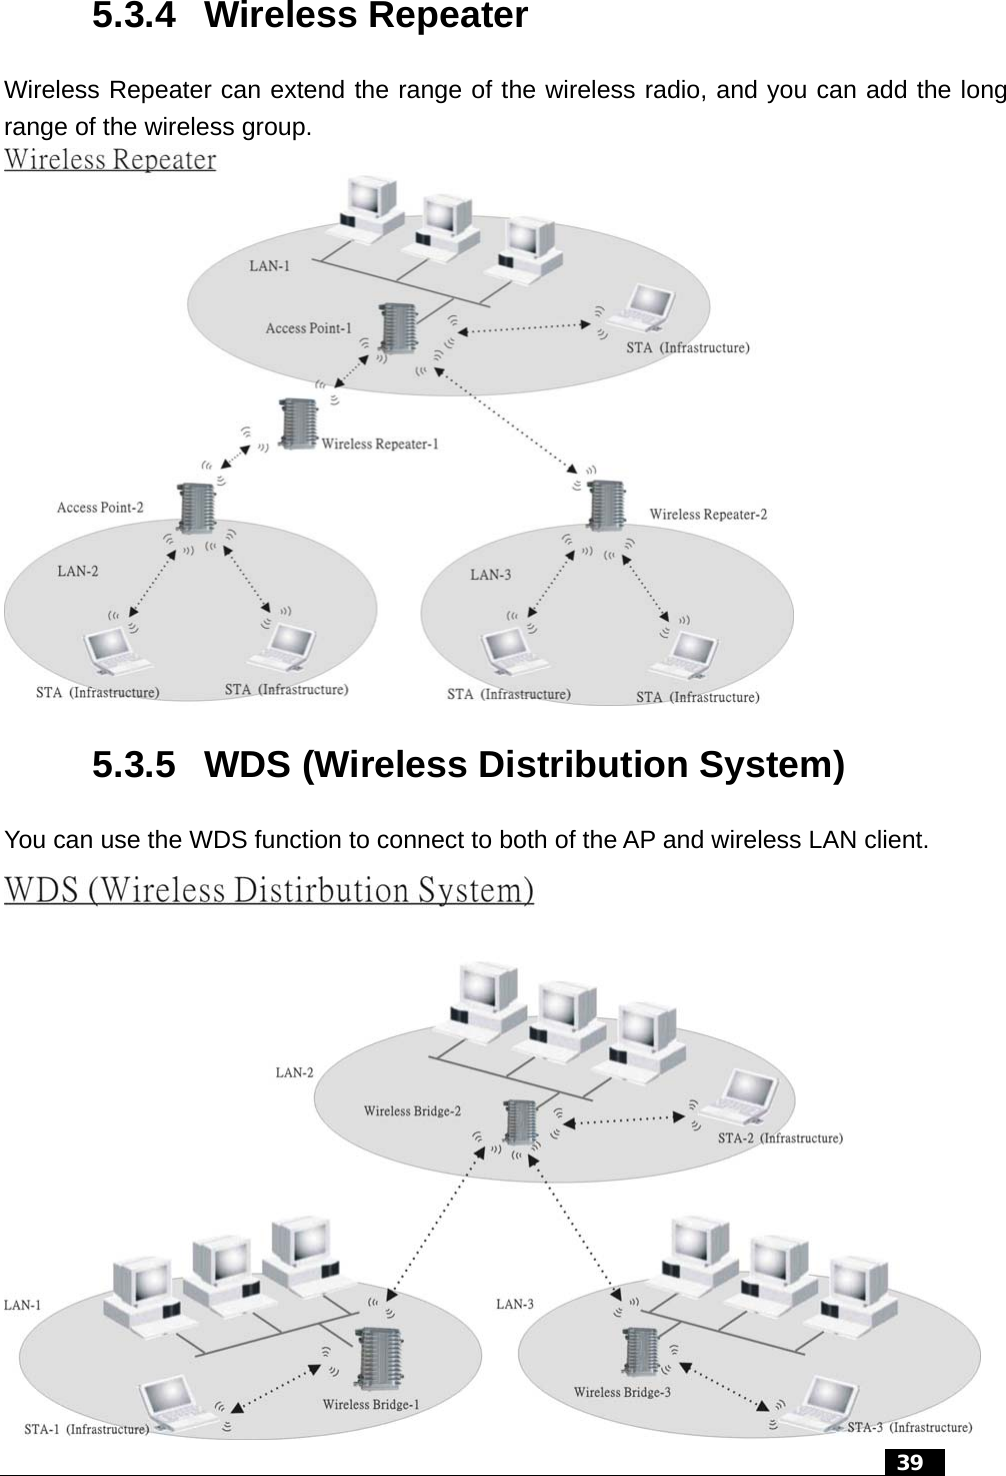 5.3.4 Wireless Repeater Wireless Repeater can extend the range of the wireless radio, and you can add the long range of the wireless group.   5.3.5  WDS (Wireless Distribution System) You can use the WDS function to connect to both of the AP and wireless LAN client.      39  